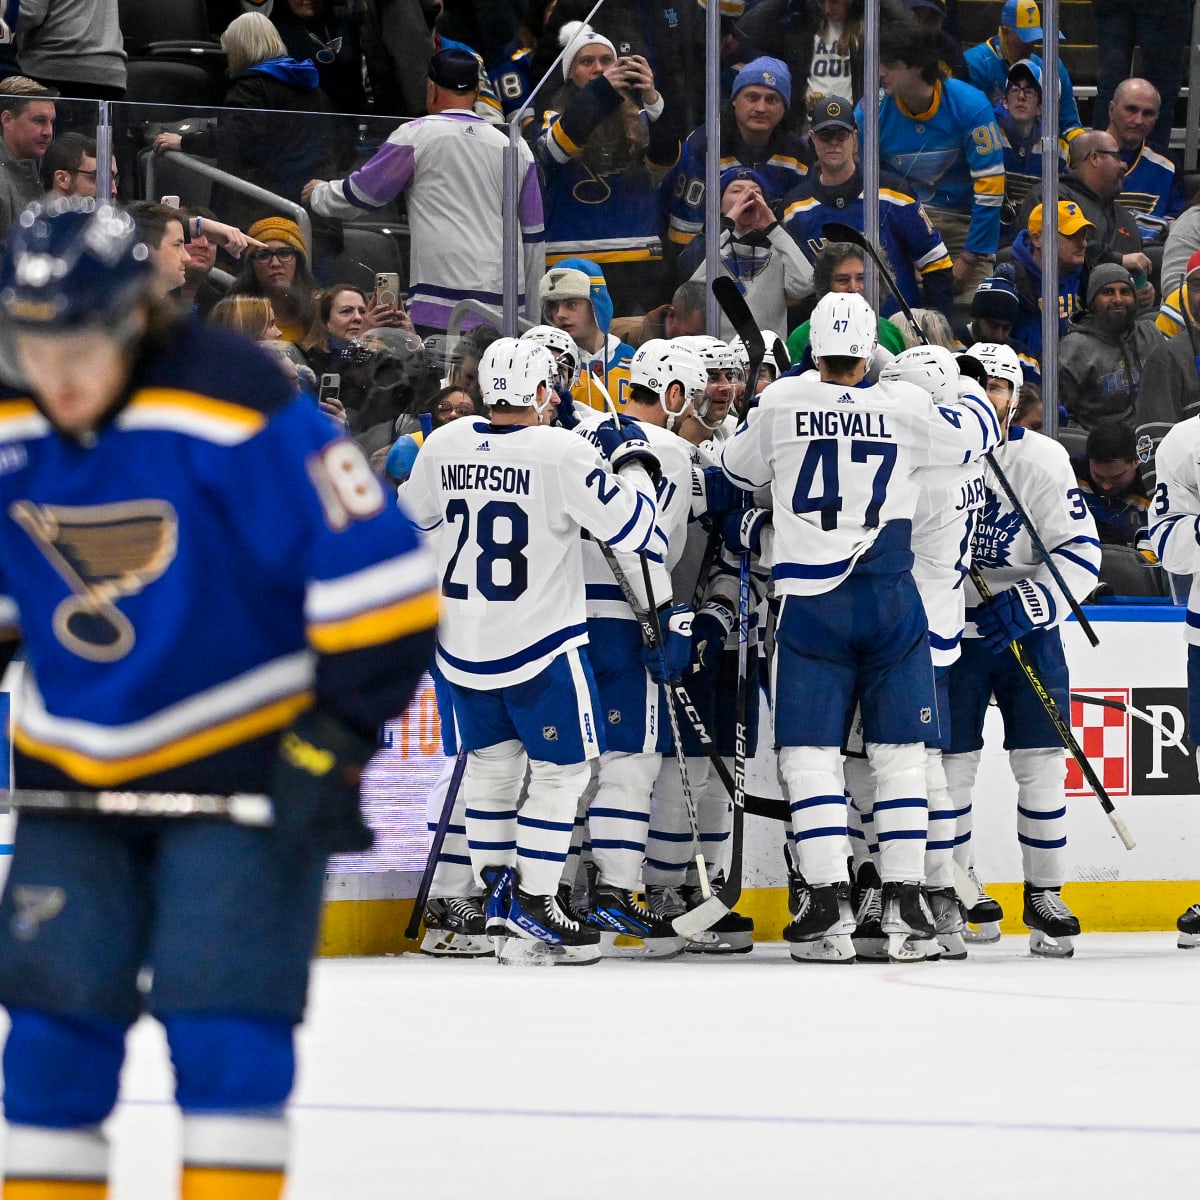 Jordan Kyrou St. Louis Blues Unsigned Congratulated by Teammates After Scoring Goal in Game Four of The First Round 2022 Stanley Cup Playoffs